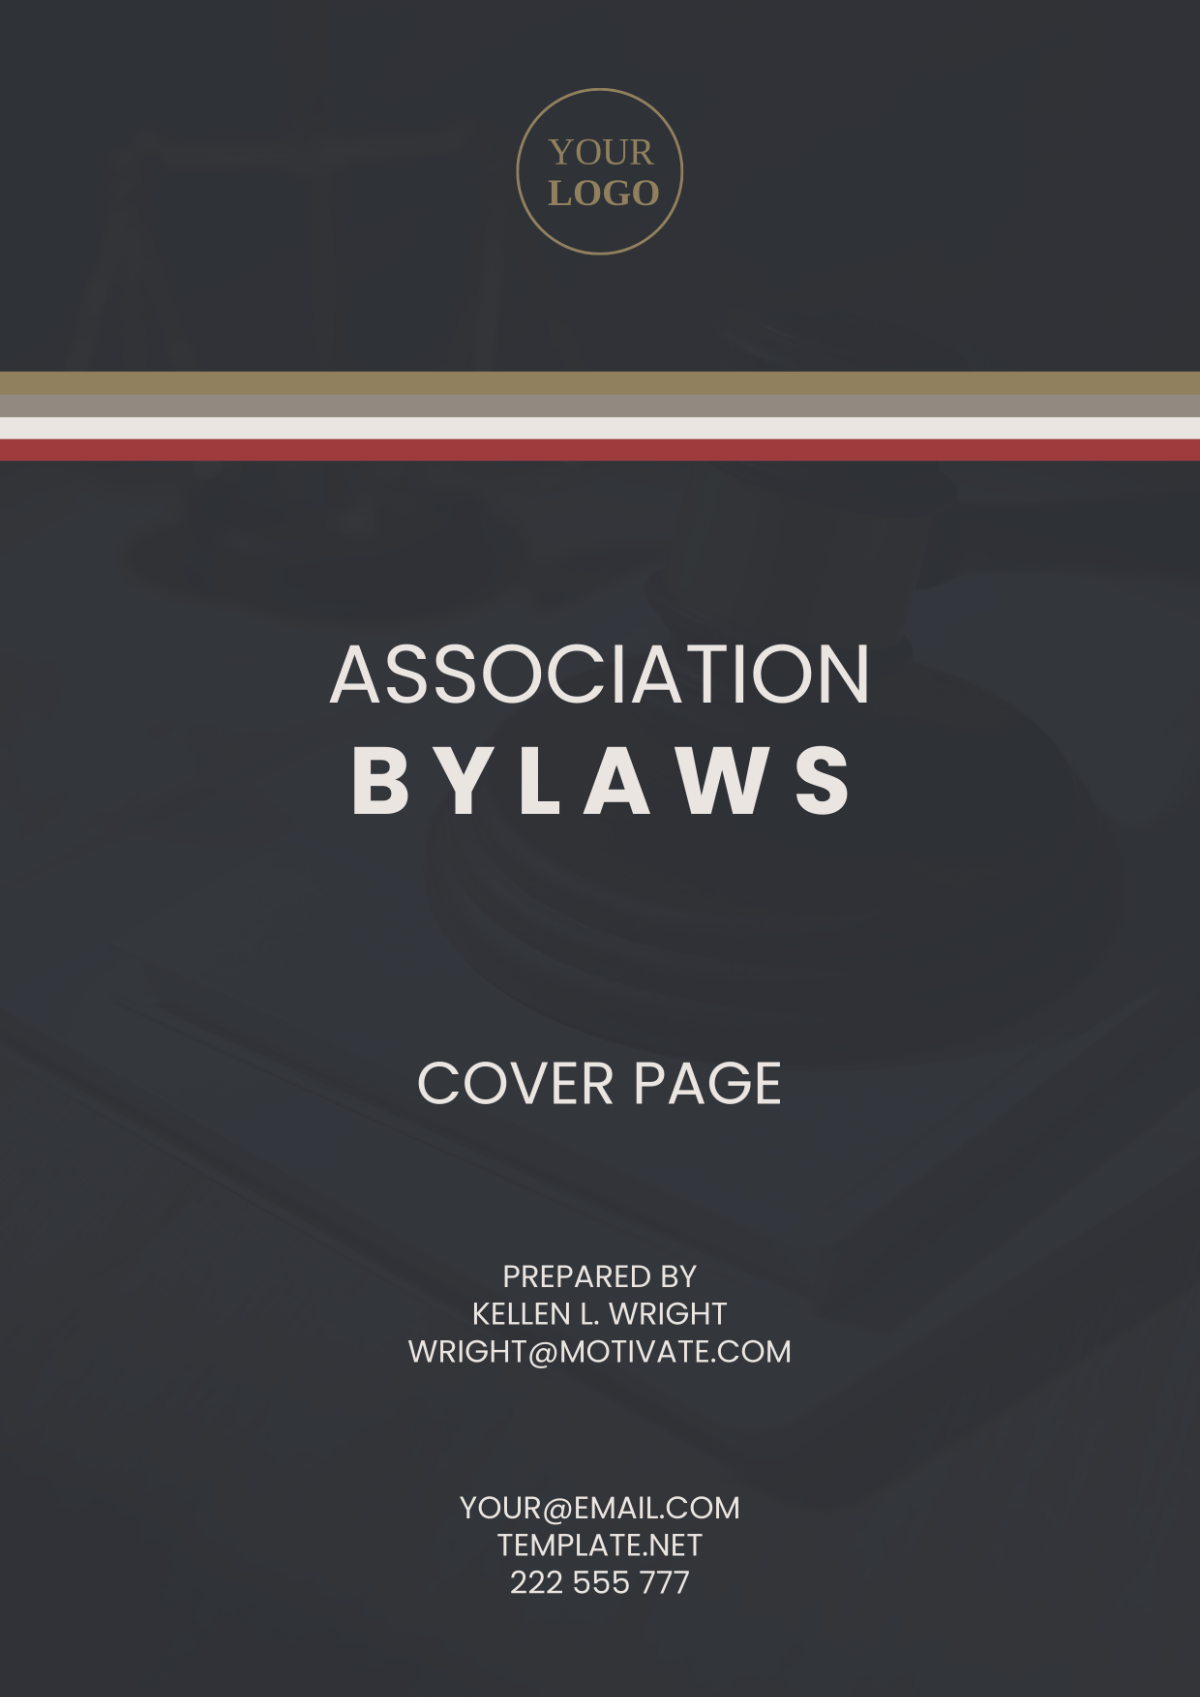 Association Bylaws Cover Page